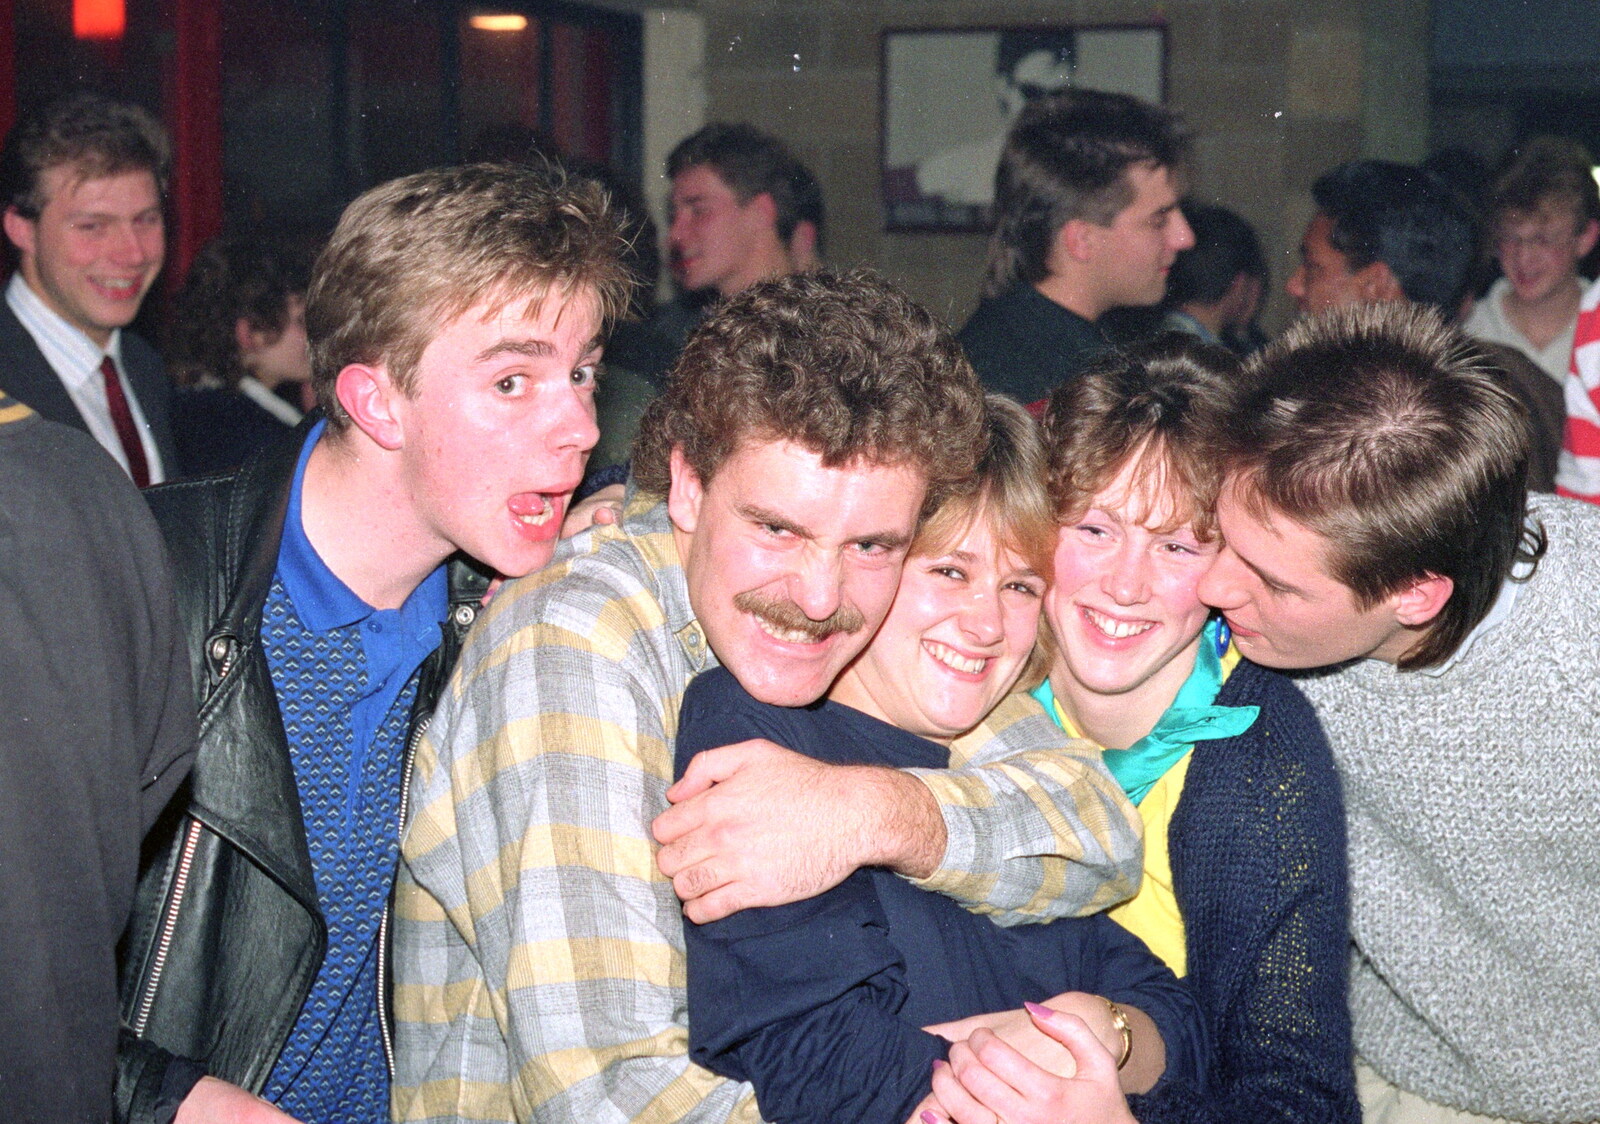 Sam Kennedy and his girfriend, with others from Uni: PPSU Office Staff and a Night in the Students' Union Bar, Plymouth - 15th March 1986